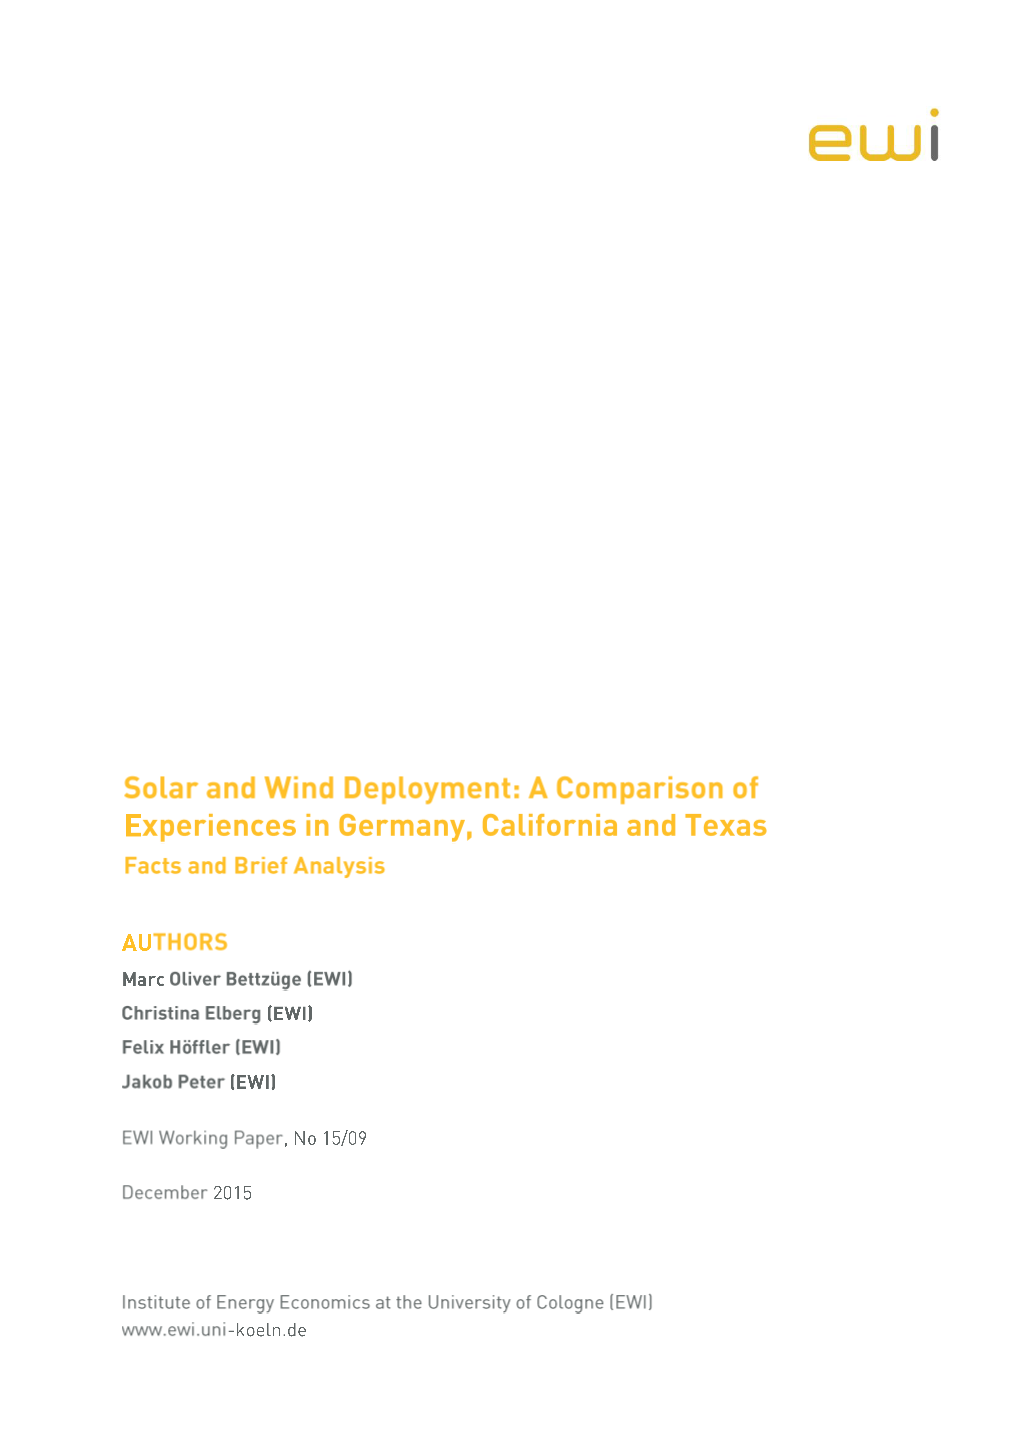 Solar and Wind Deployment in Germany, California and Texas